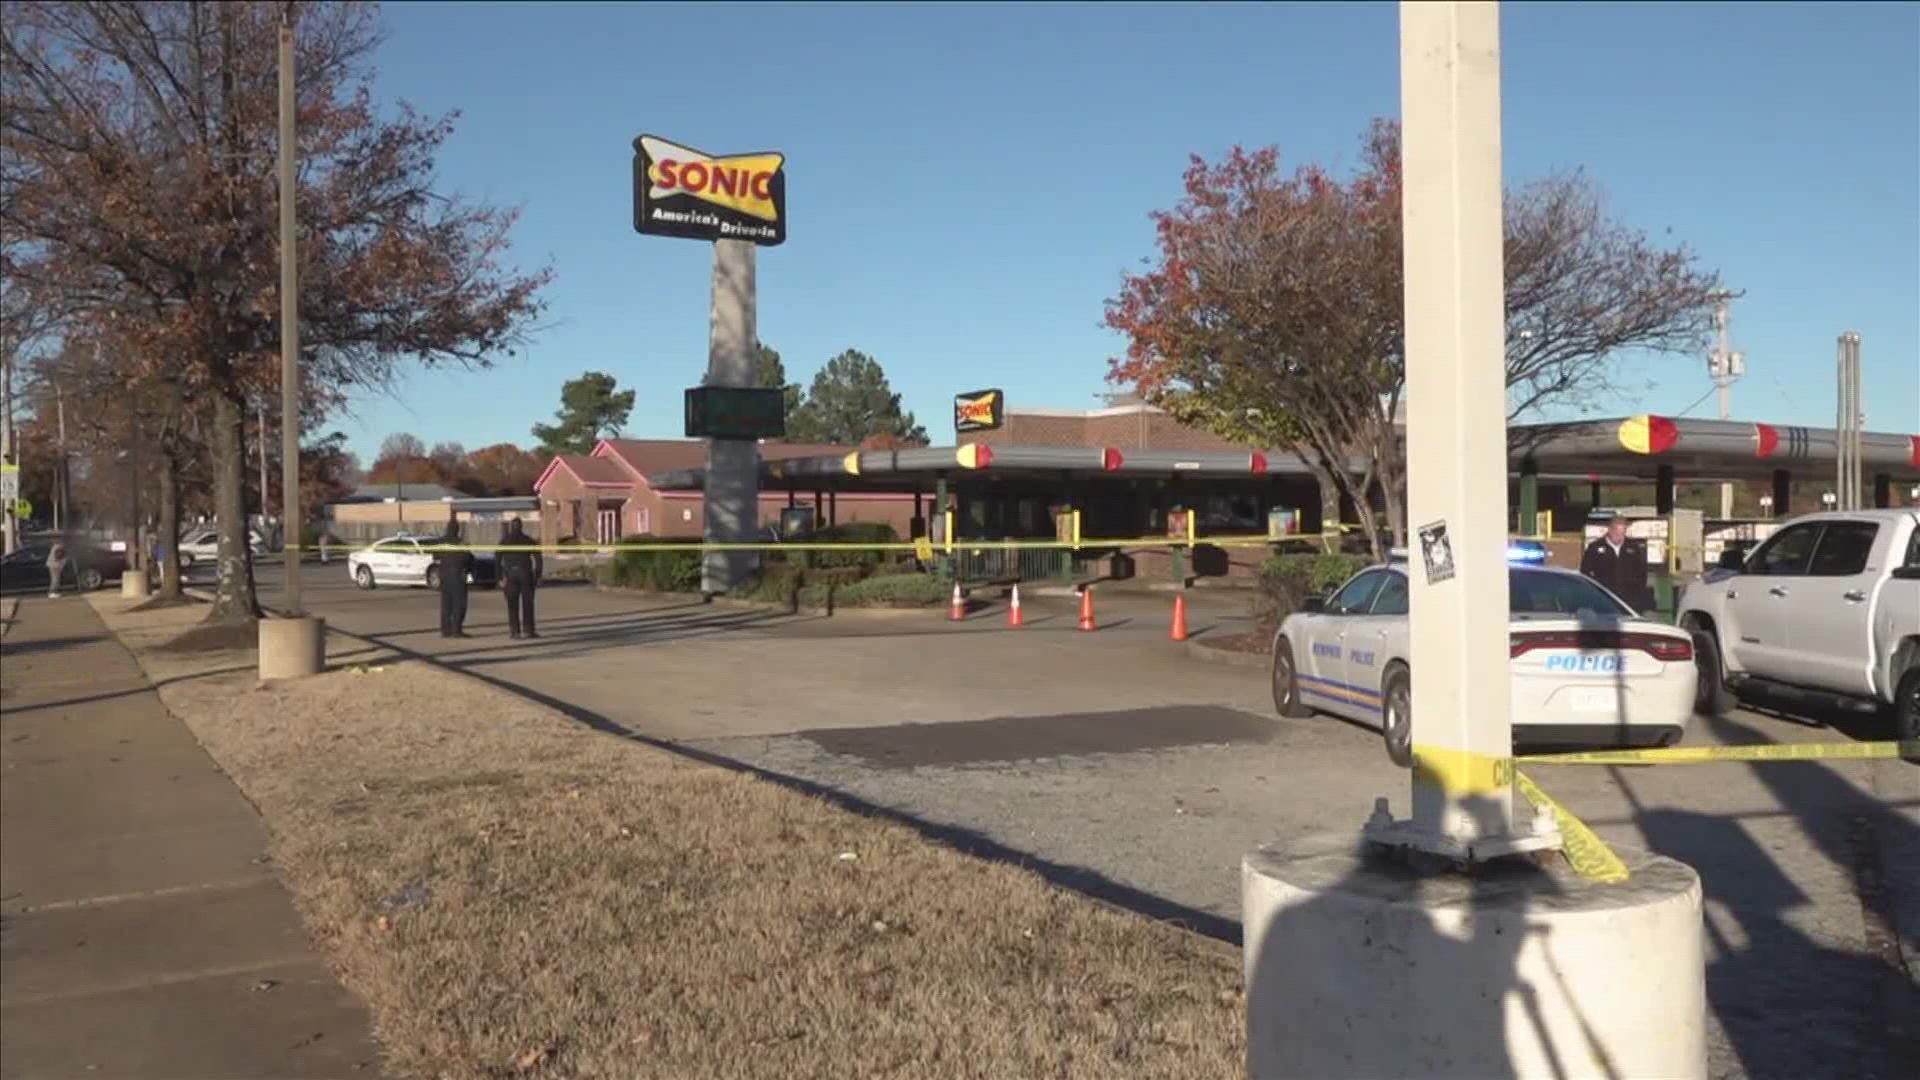 Memphis police said officers were called to the shooting at 4130 Kirby Pkwy. at 2:40 p.m. Wednesday, Nov. 30, 2022.